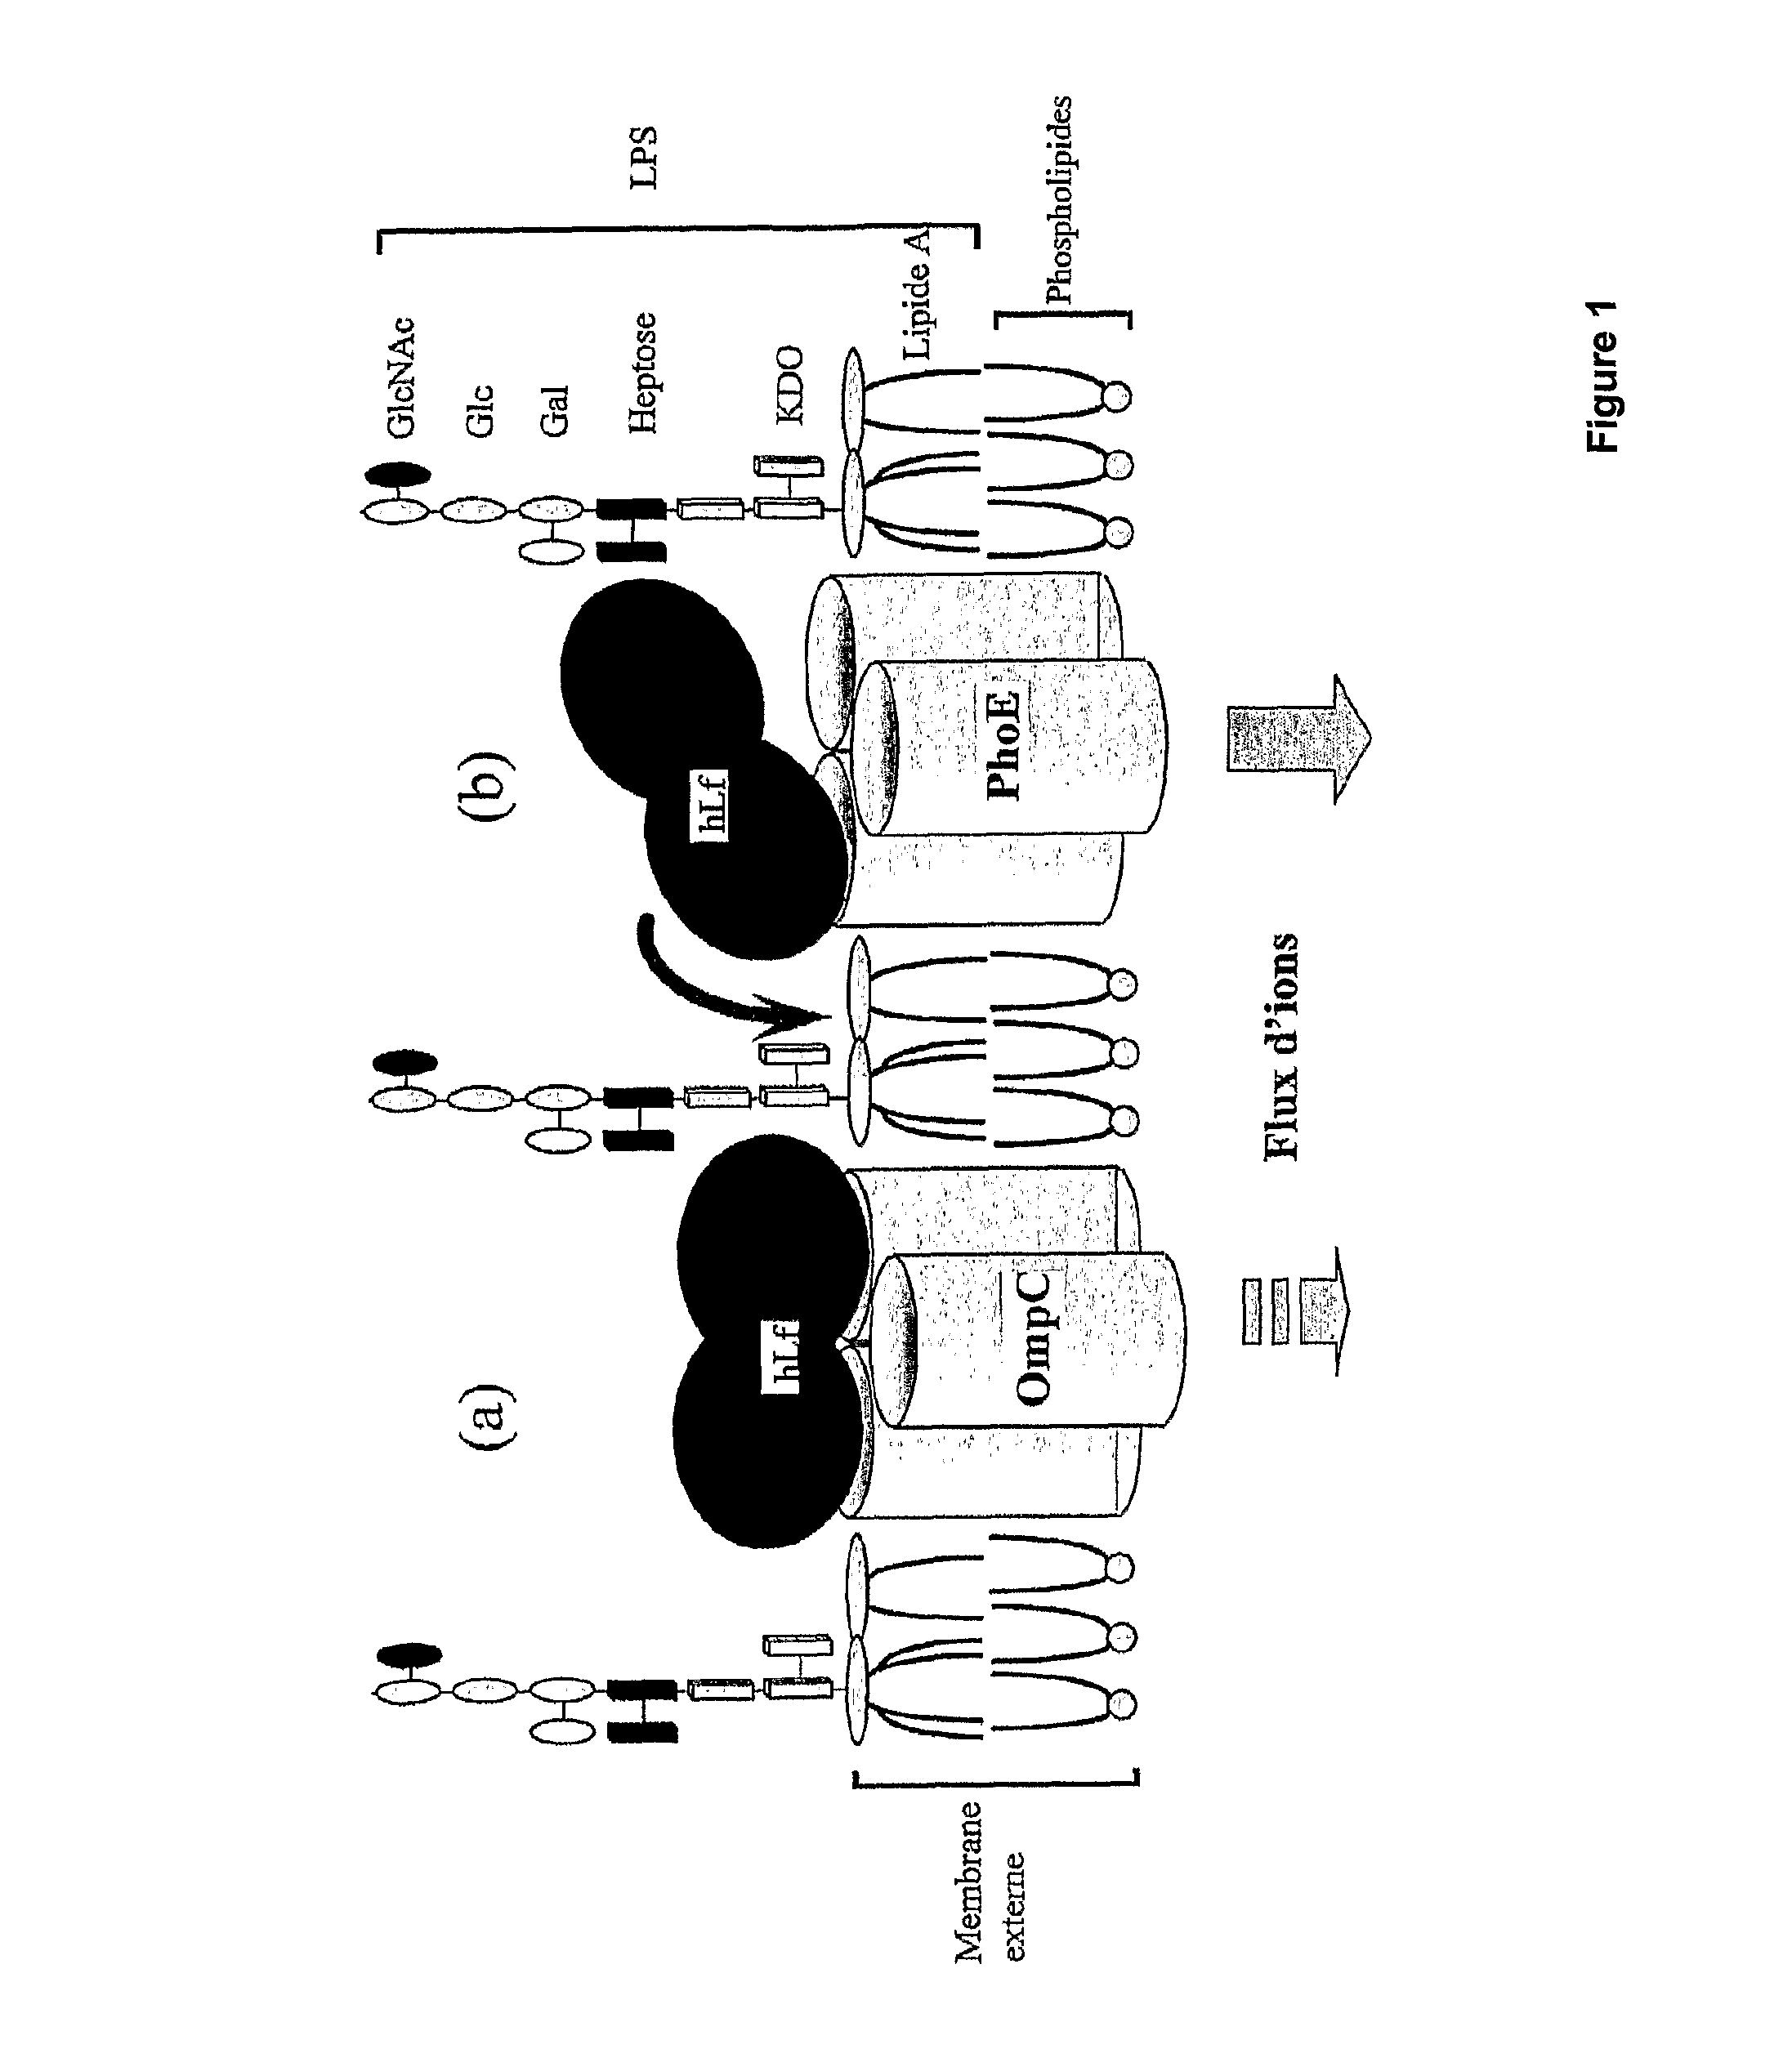 Method for production of lactoferrin